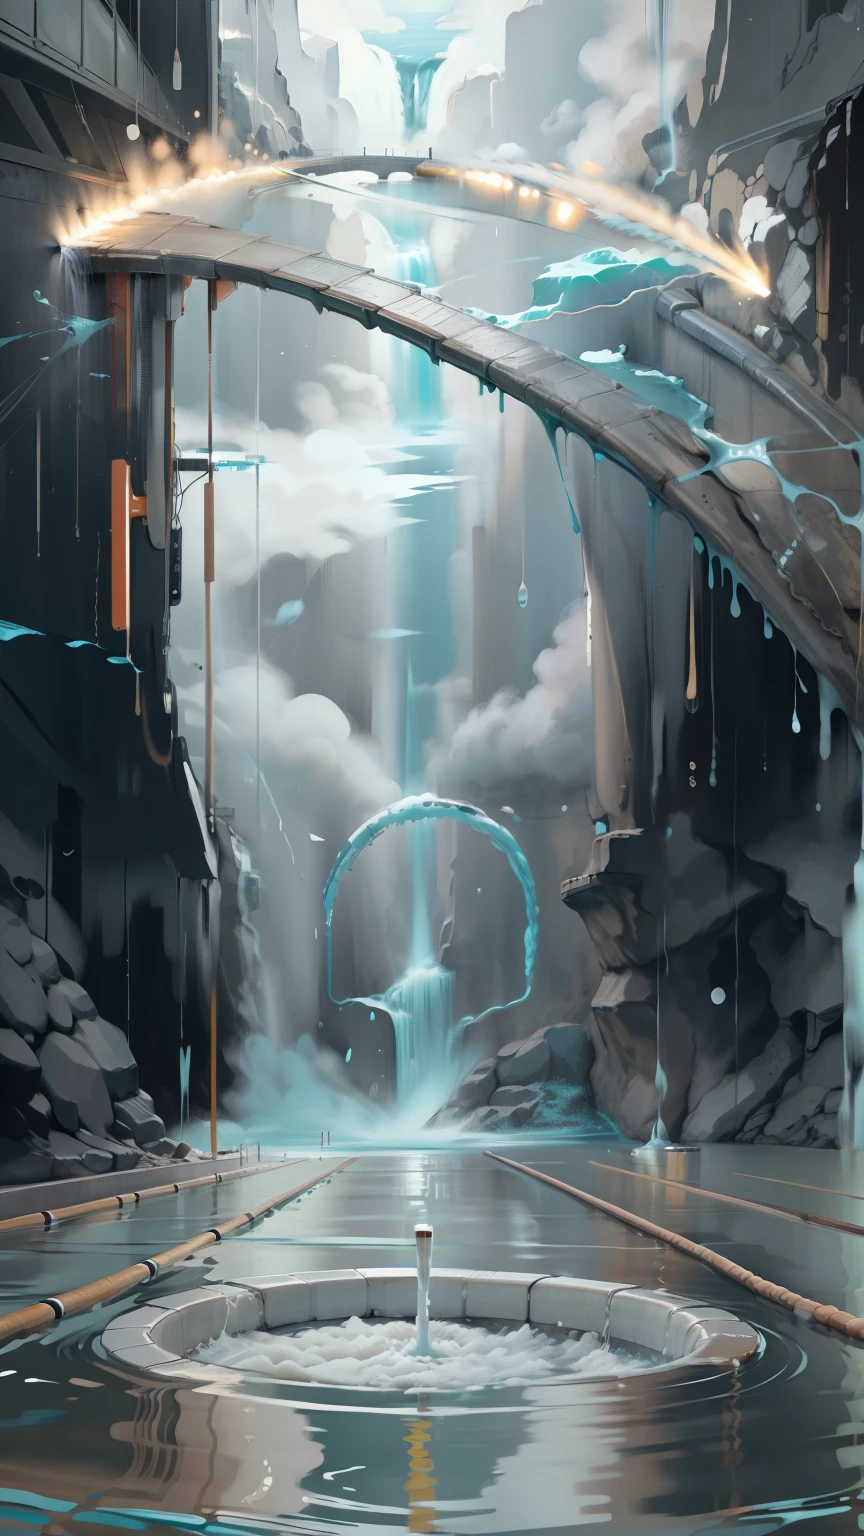 At the bottom is the swimming pool，Racing Tracks，The background is a waterfall，water flowing，Splashing waves，Realisticstyle，Realiy，keyframe，An arrow made up of water in the air，a sense of atmosphere，Strong sense of space